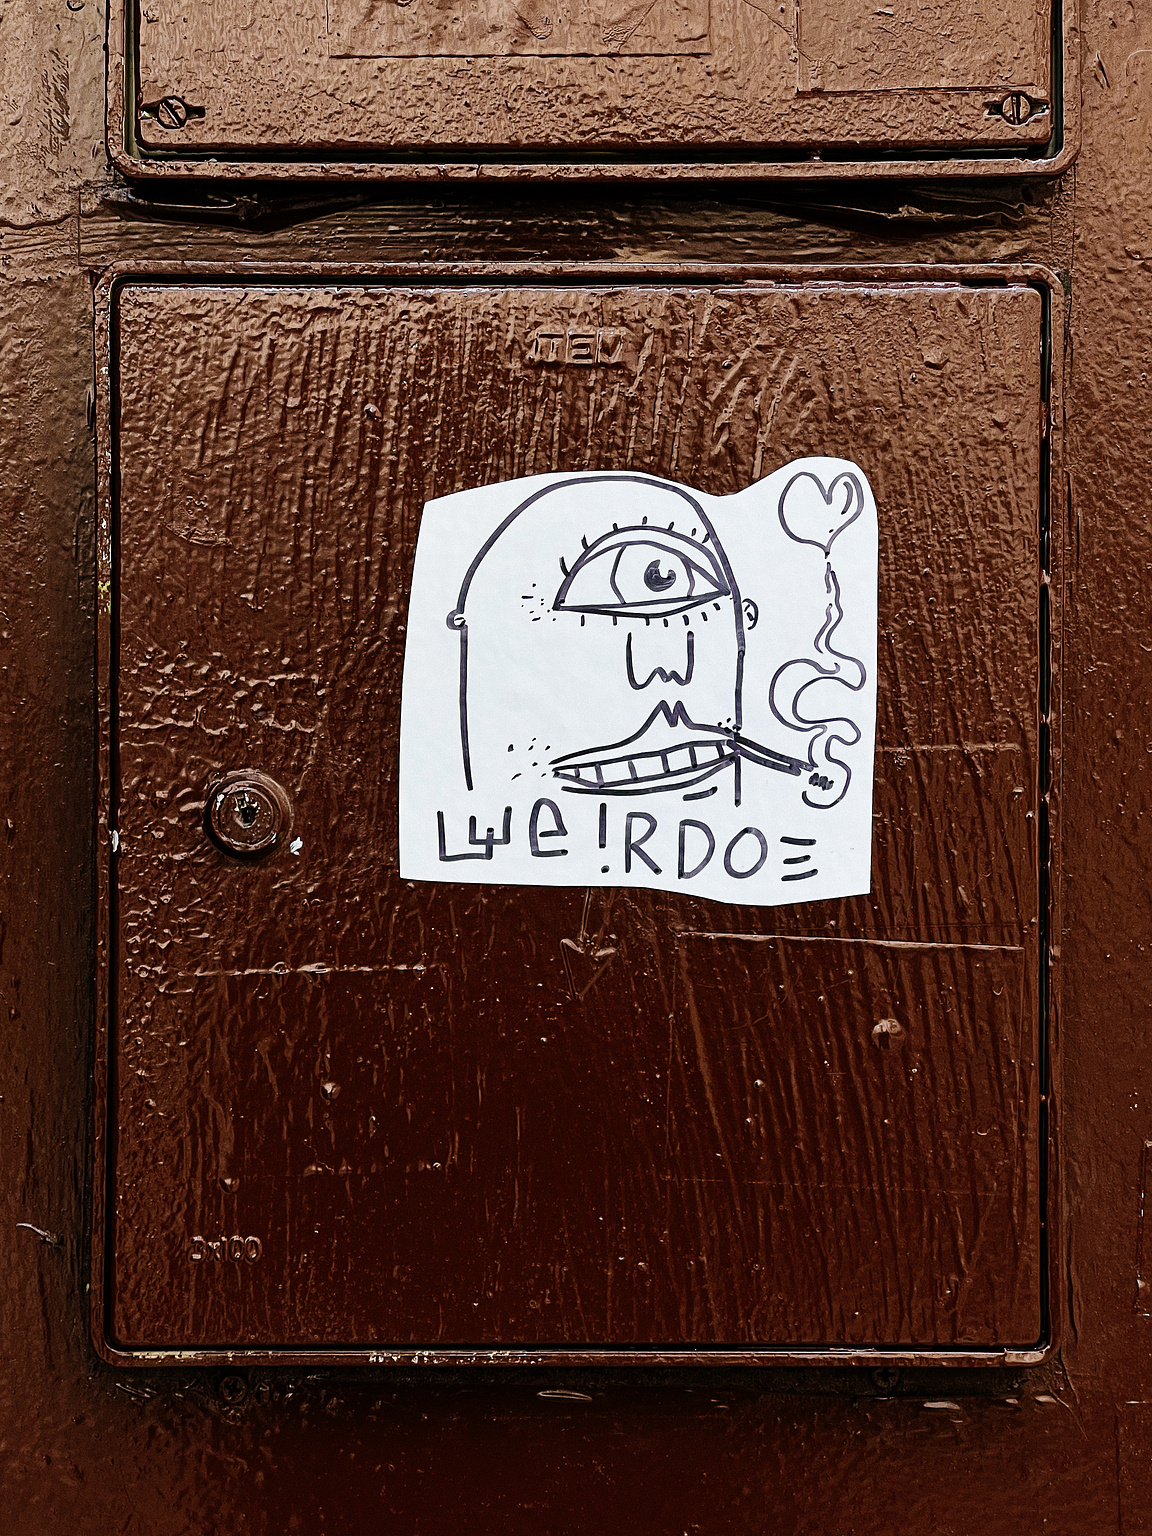 A sticker with a doodle of a face and the word "WEIRDO" is affixed to a textured brown door.